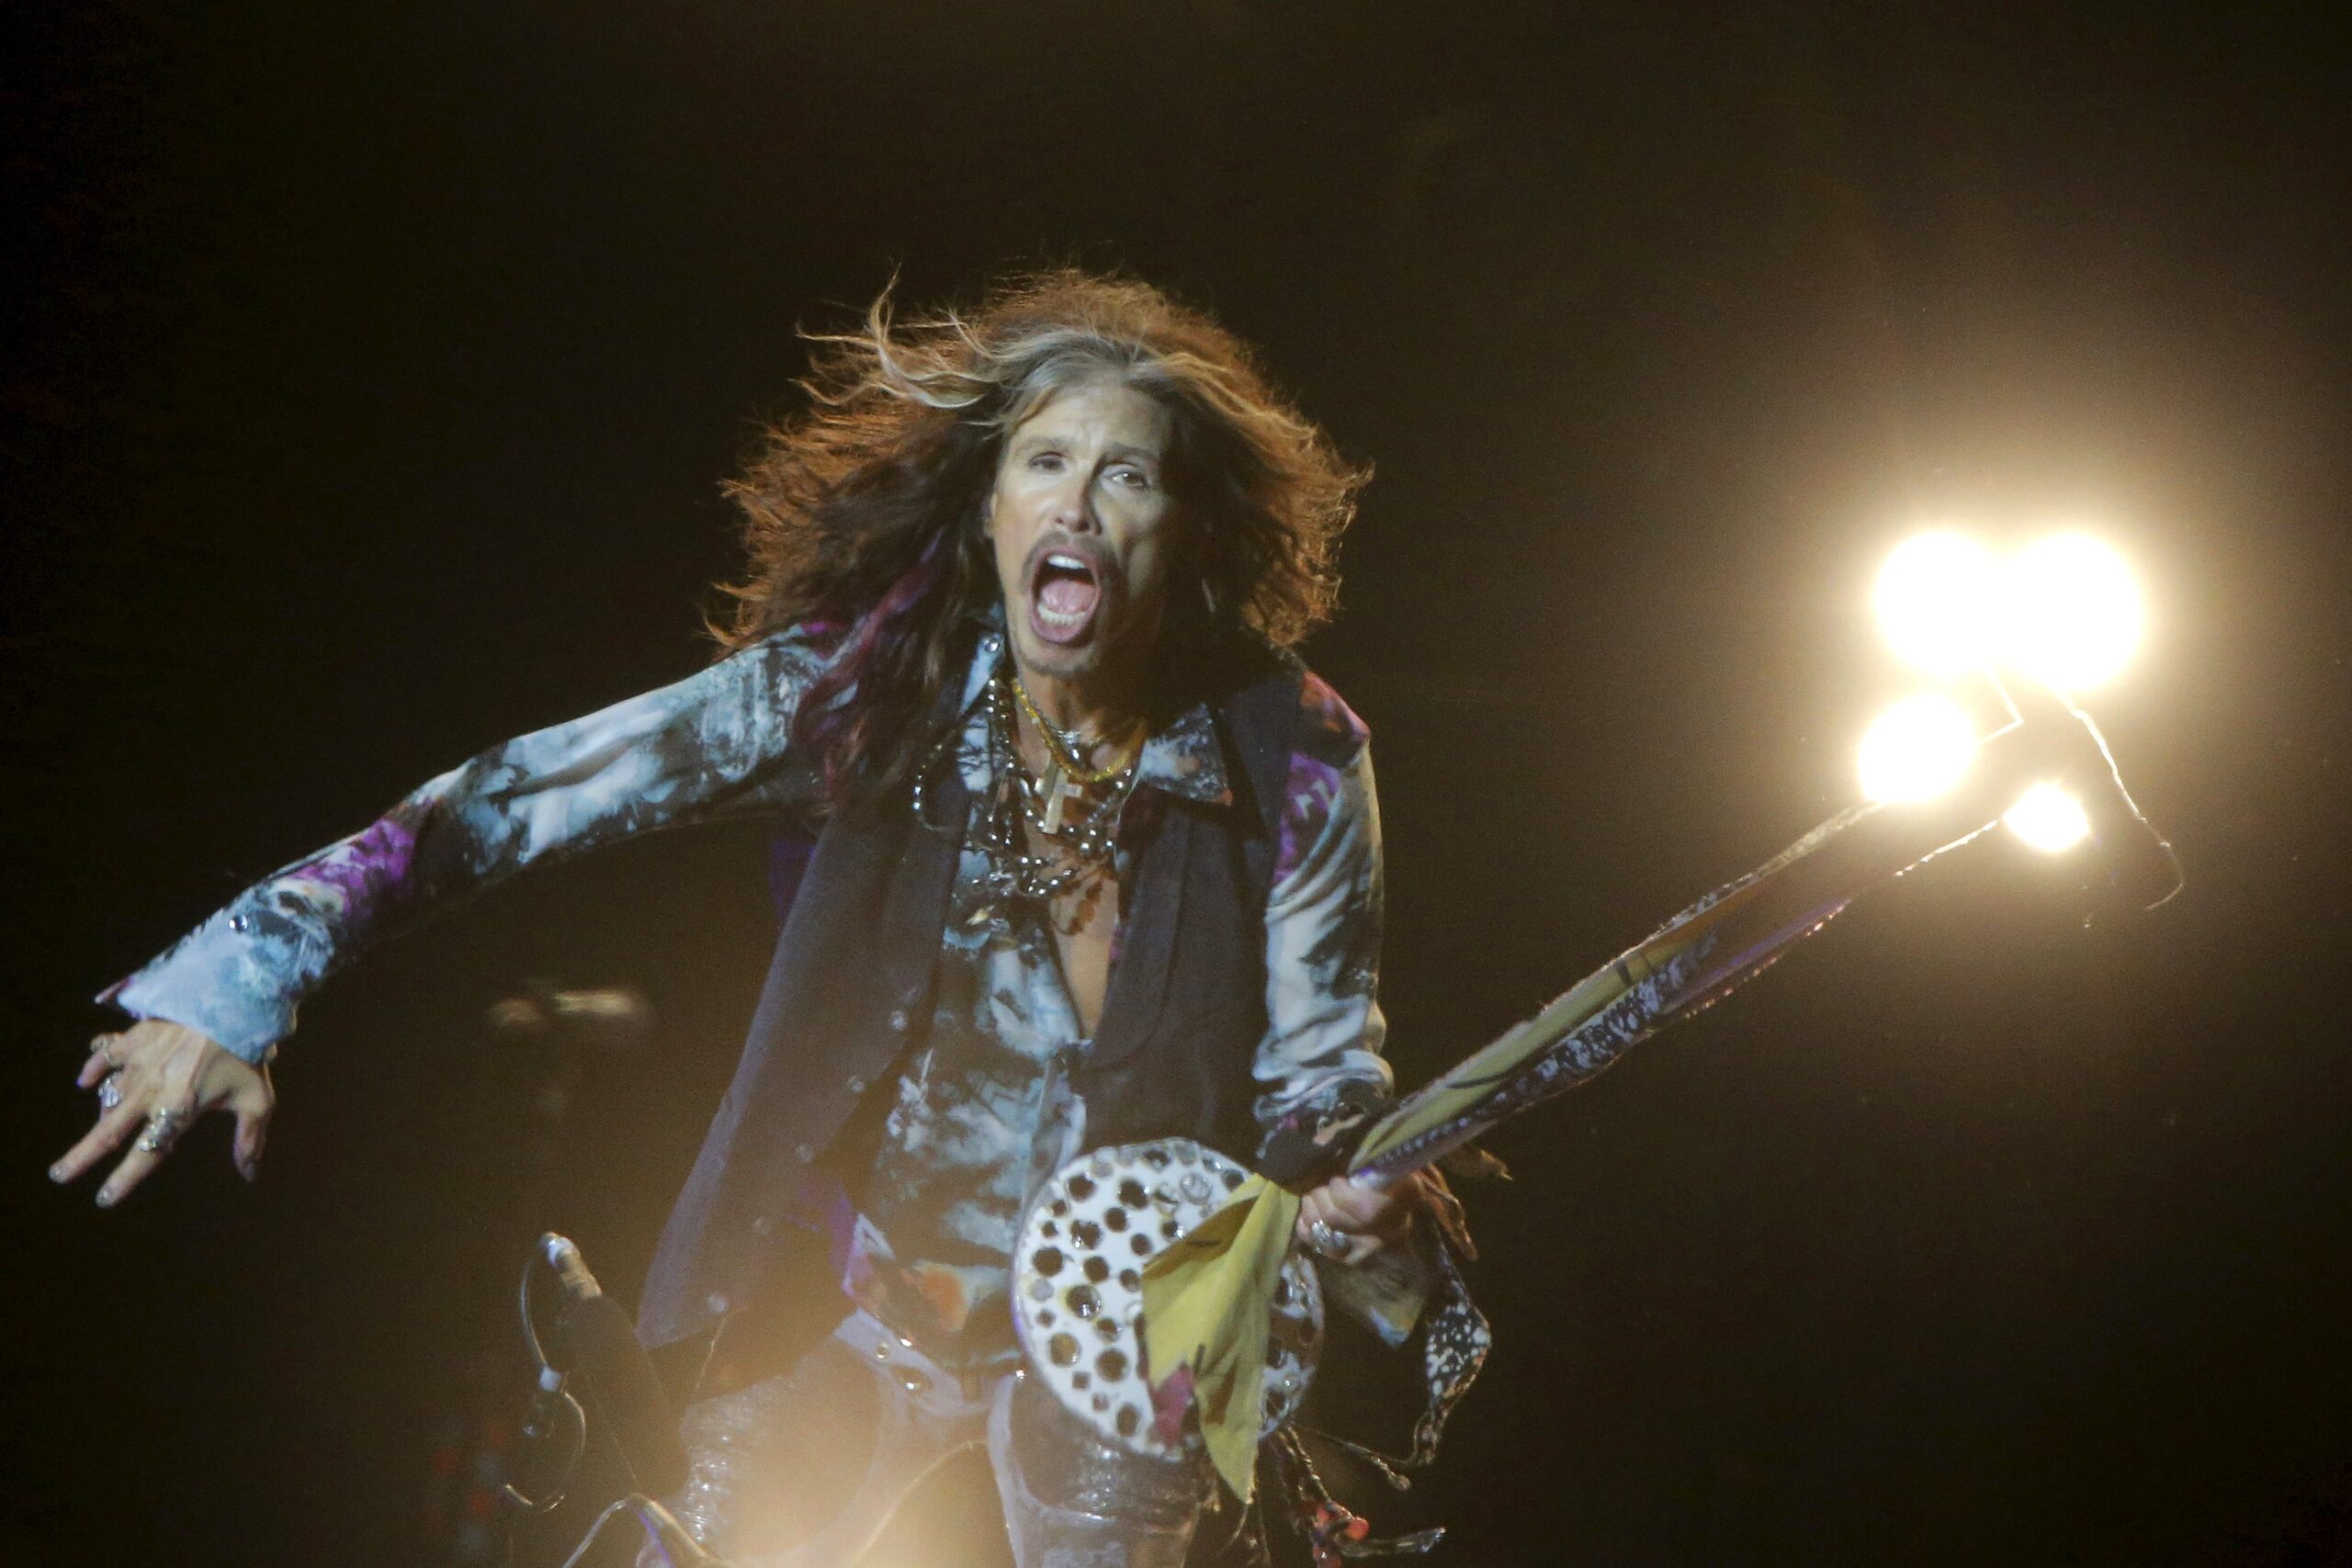 Steven Tyler joins Zac Brown Band at Fenway - The Boston Globe